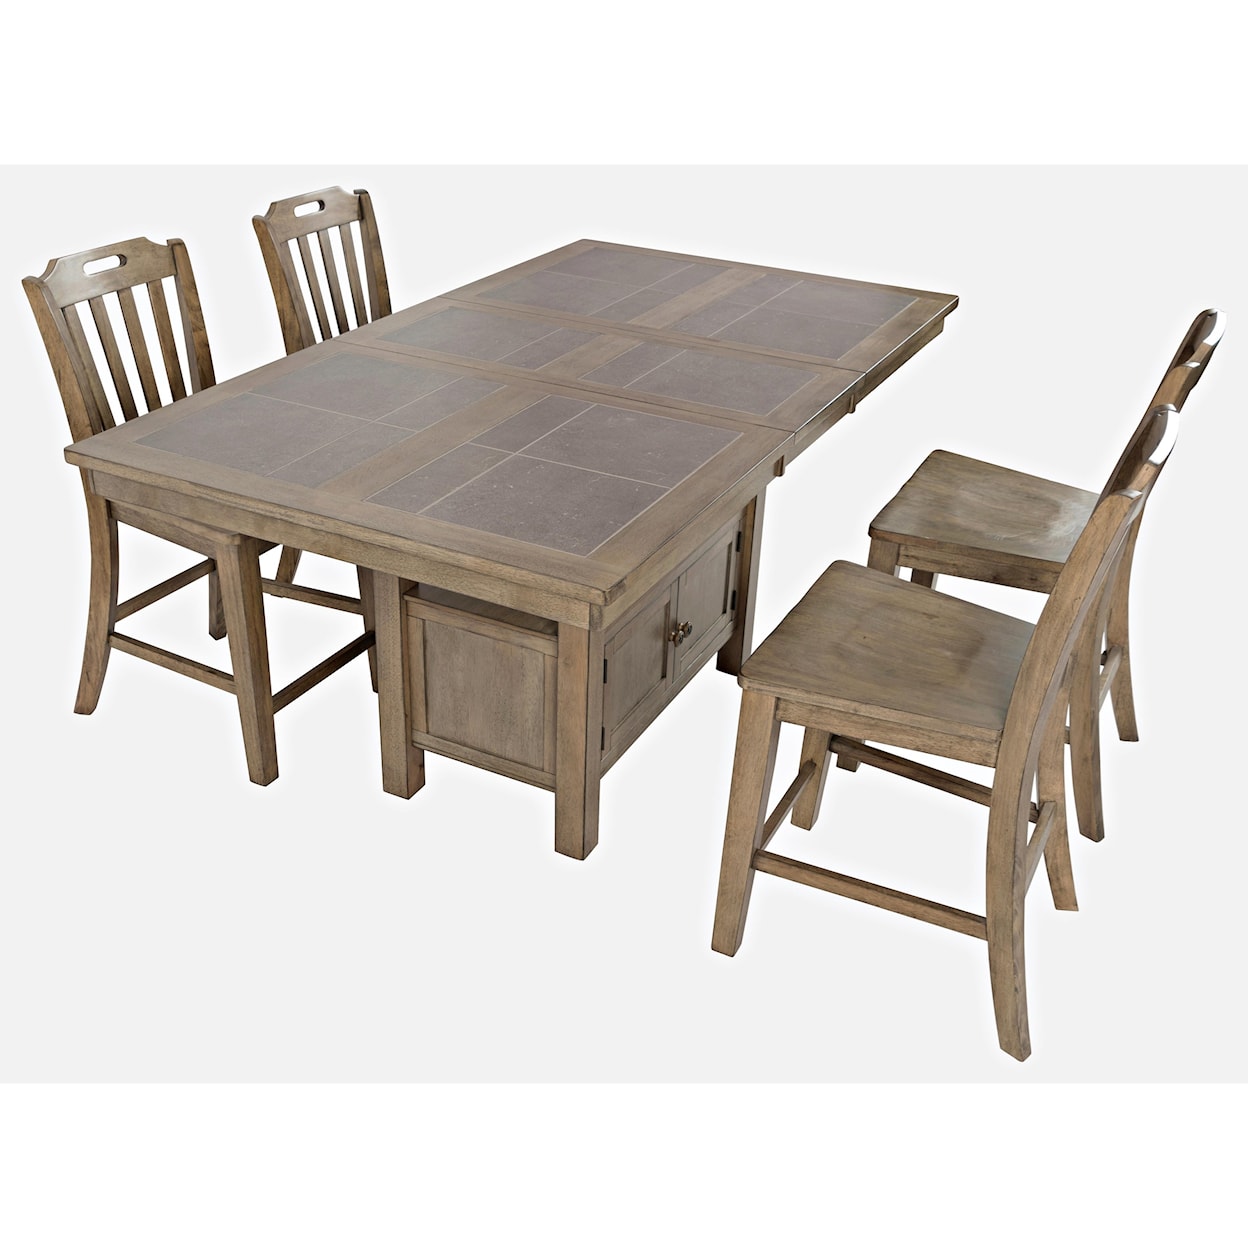 Jofran Prescott Park 5-Piece Dining Table and Chair Set